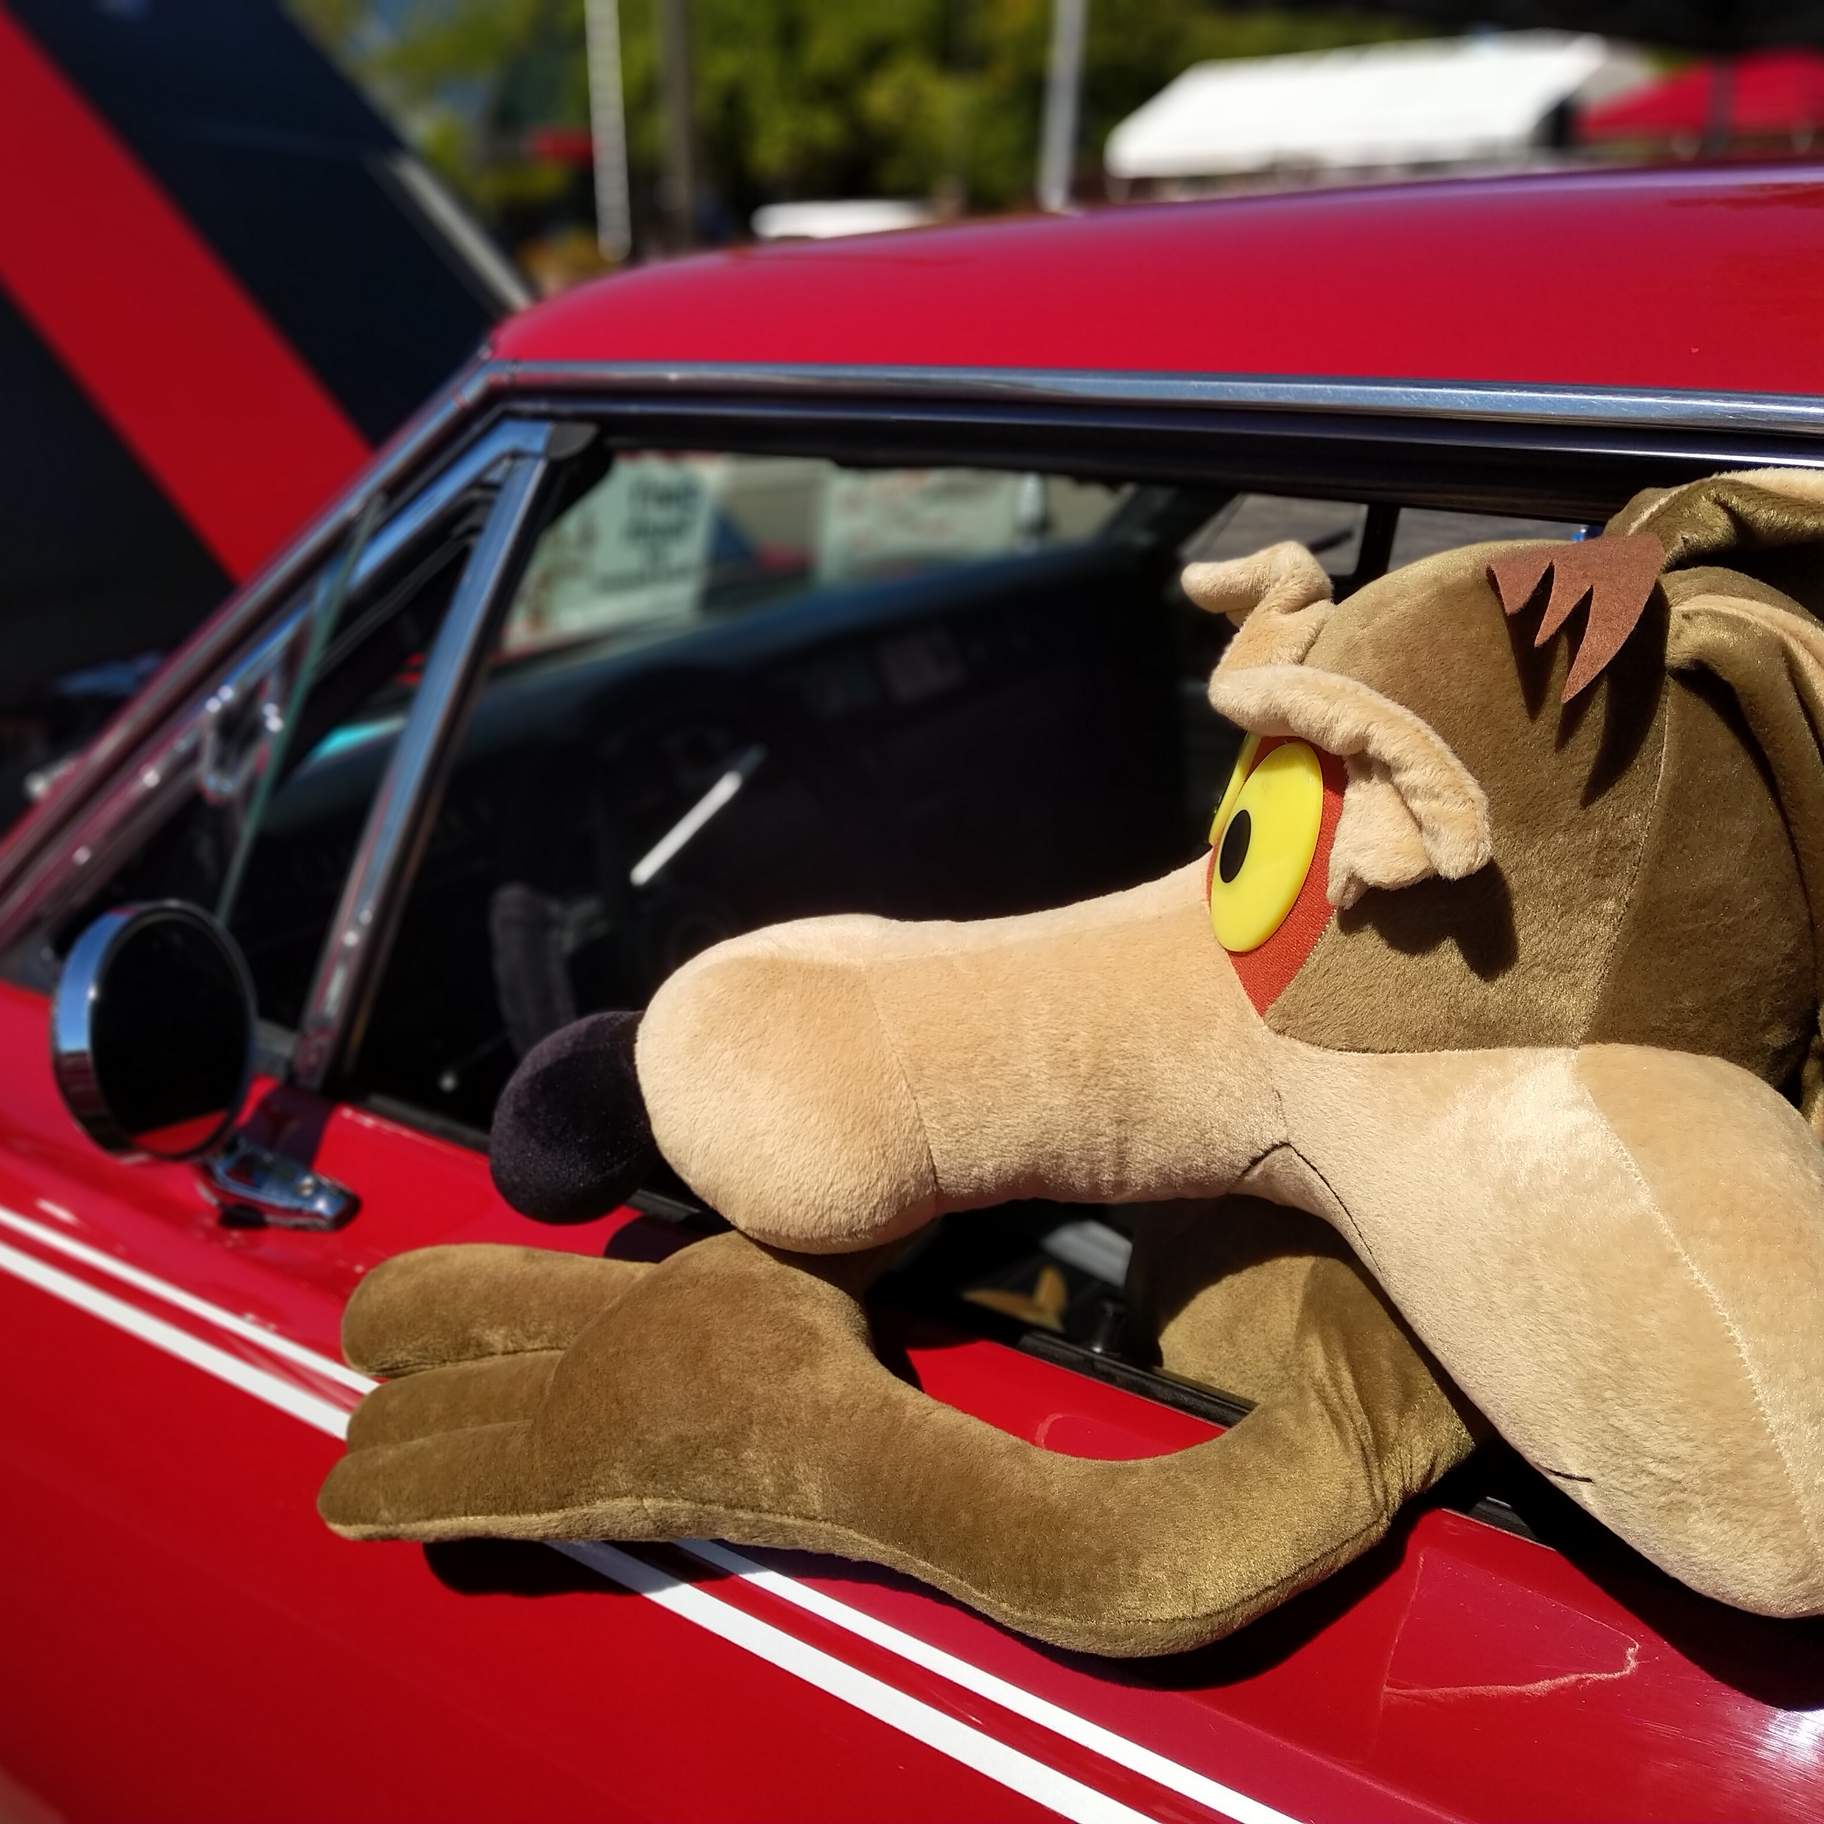 Wile E. Coyote looking into the left side mirror of a red Plymouth Road Runner.